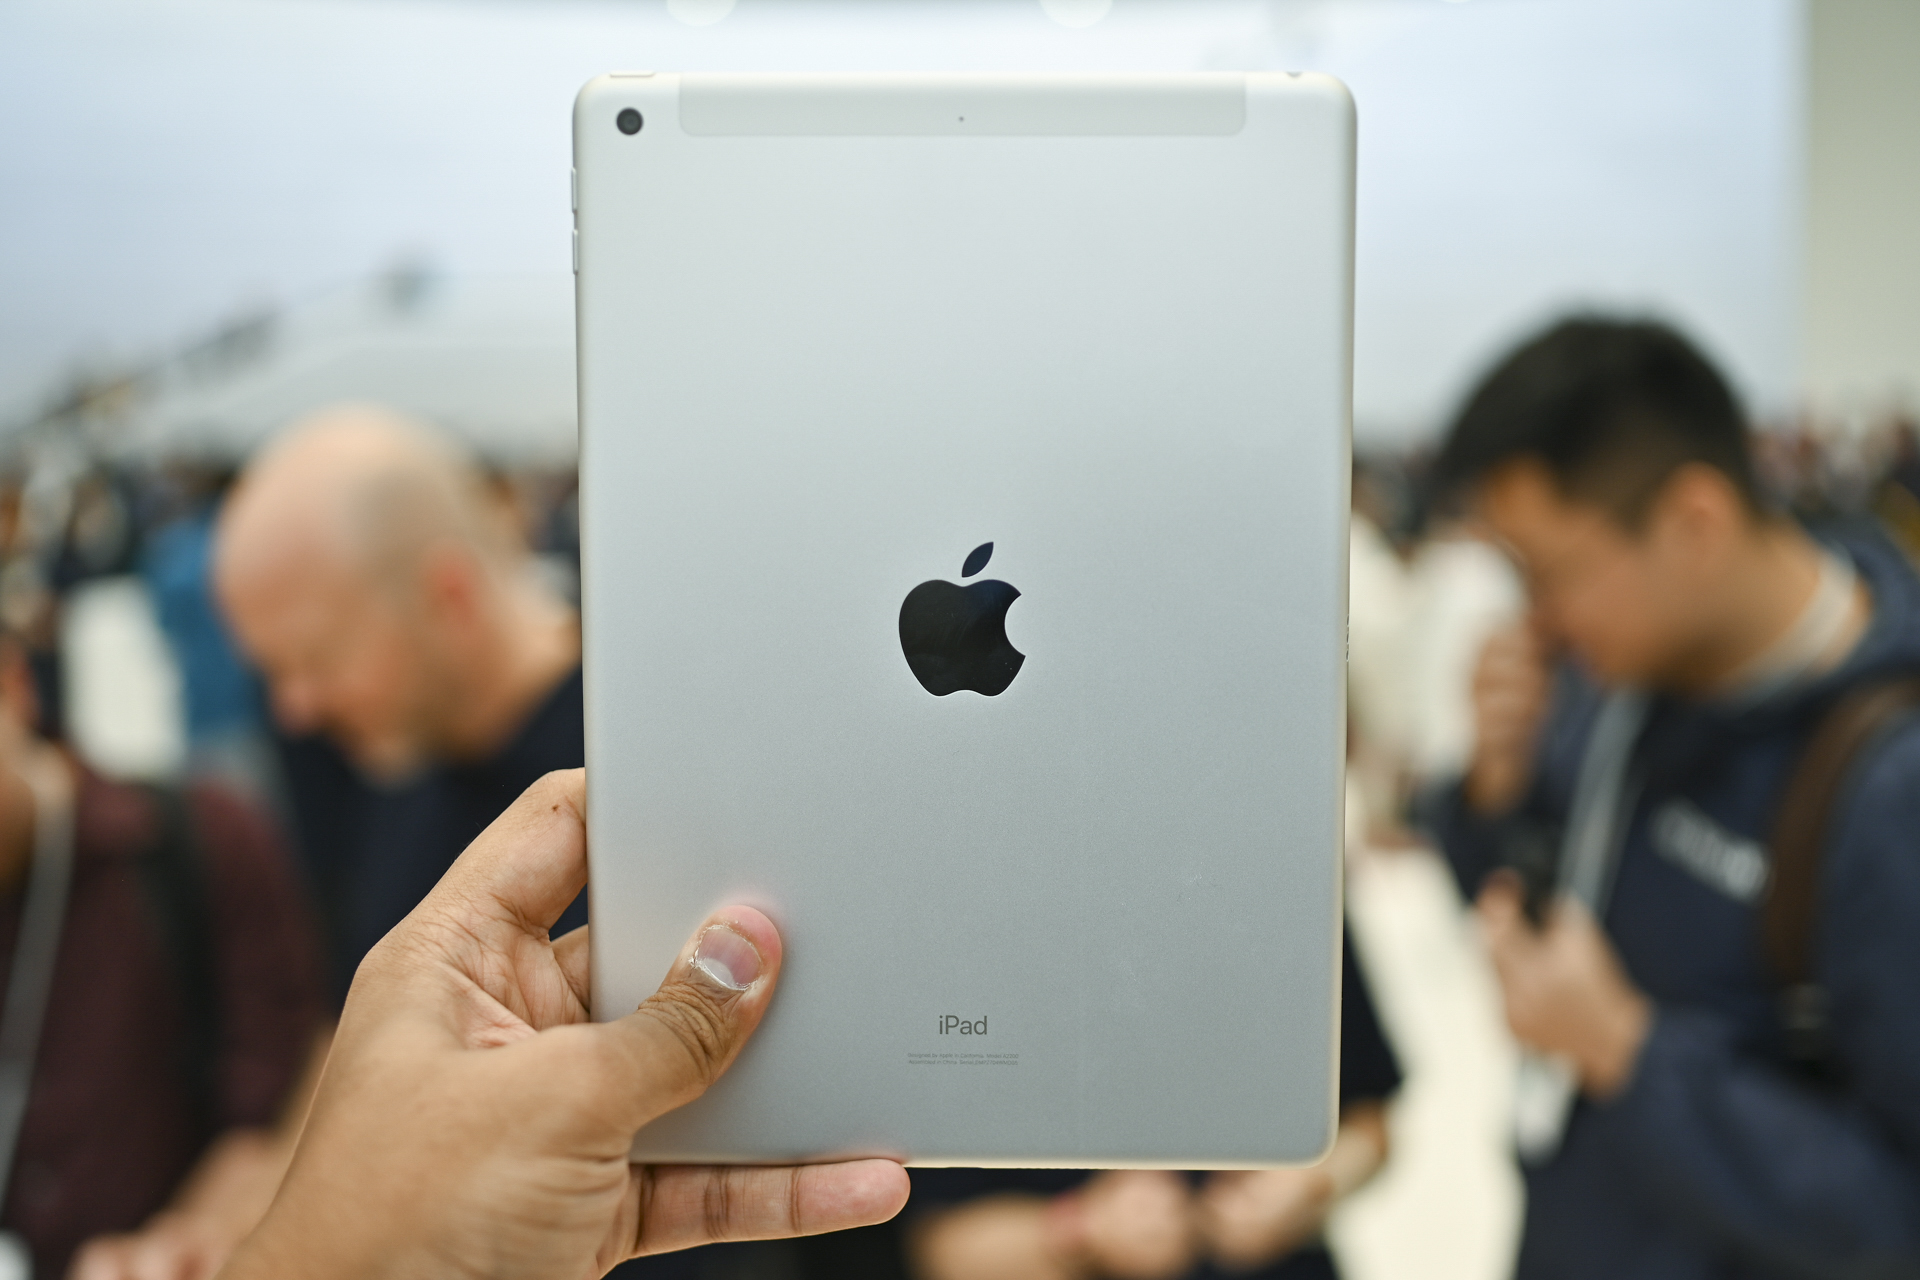 Hands on with the 2019 10.2-inch seventh generation iPad